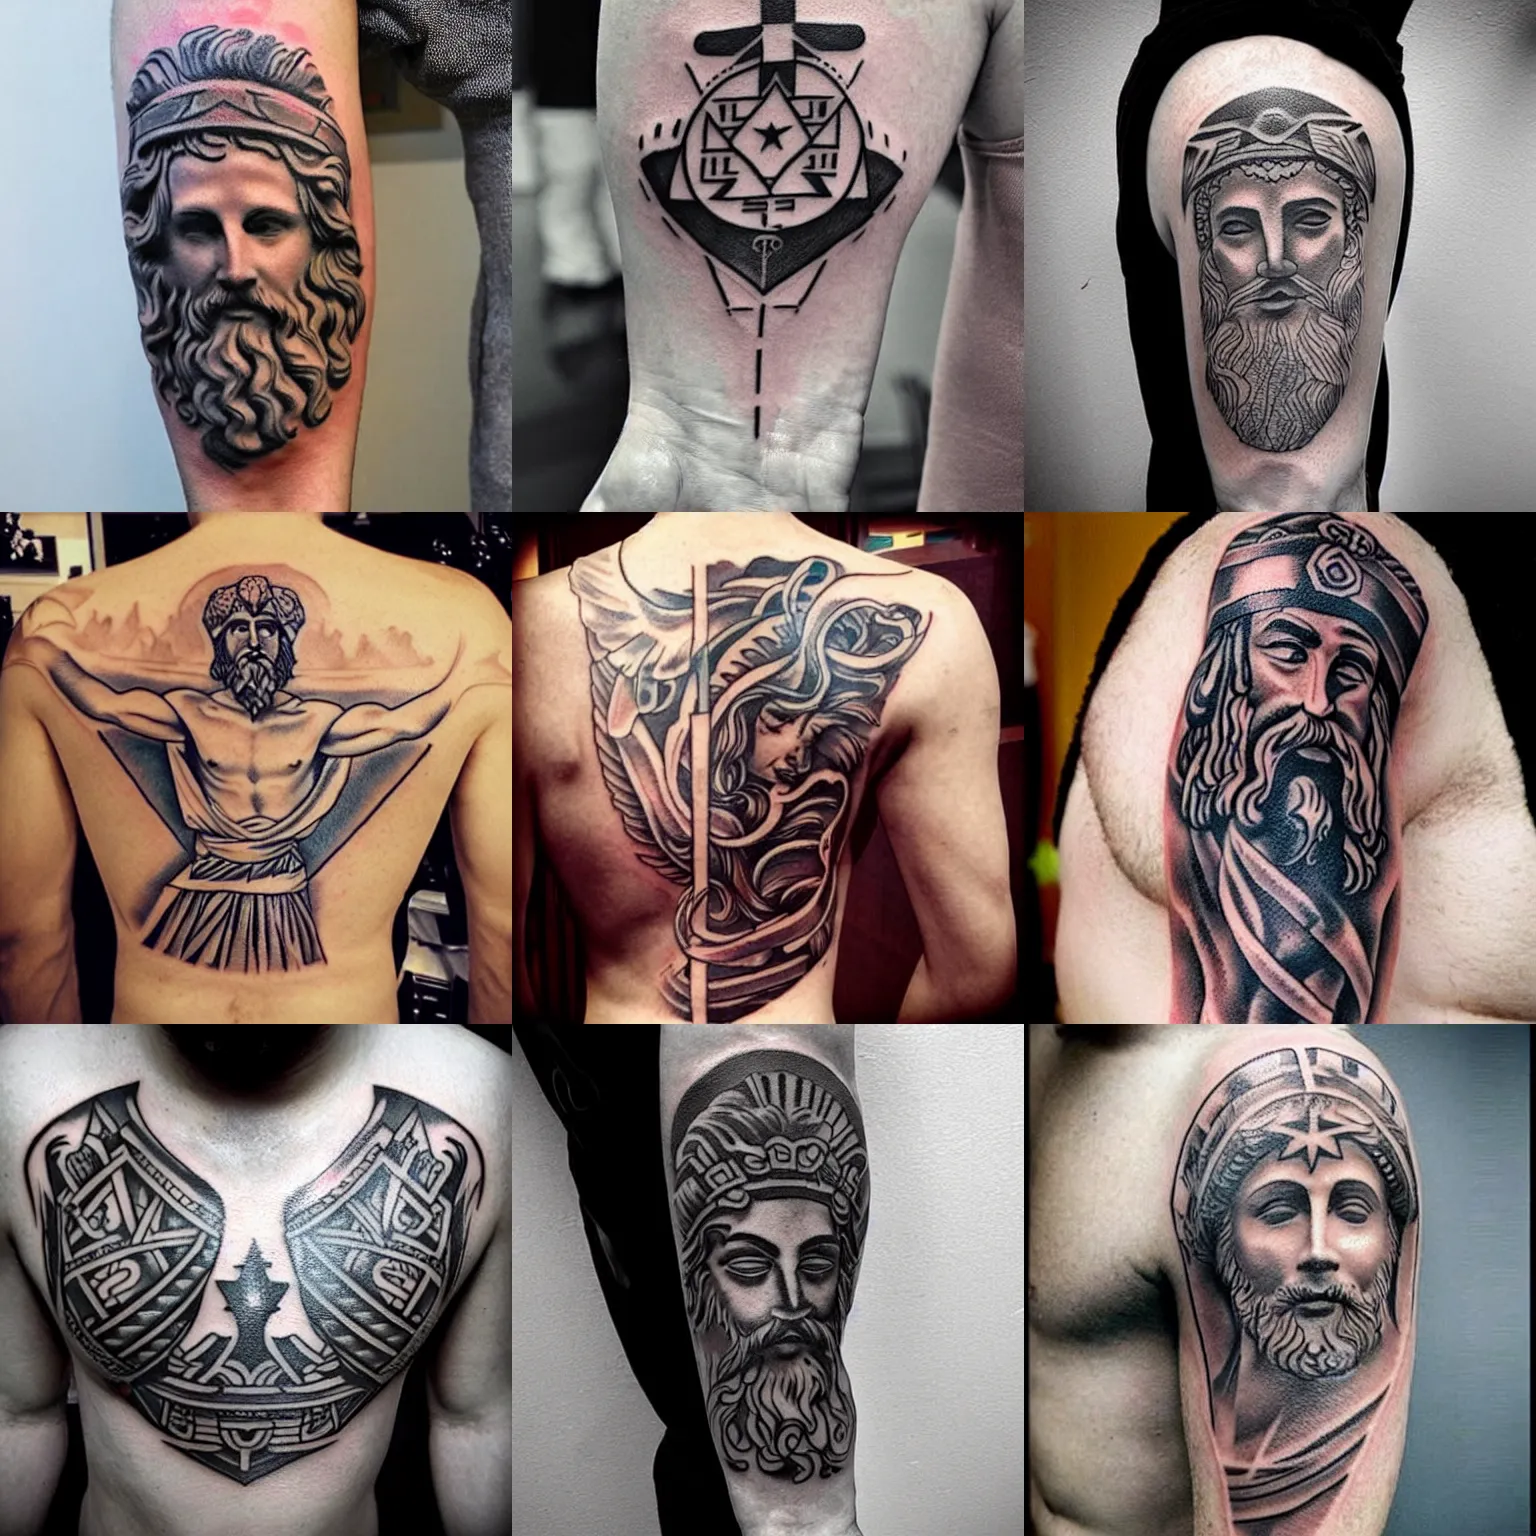 101 Amazing Greek Tattoo Designs You Need To See! | Outsons | Men's Fashion  Tips And Style Guide For 20… | Greek tattoos, Greek mythology tattoos, Cool  back tattoos